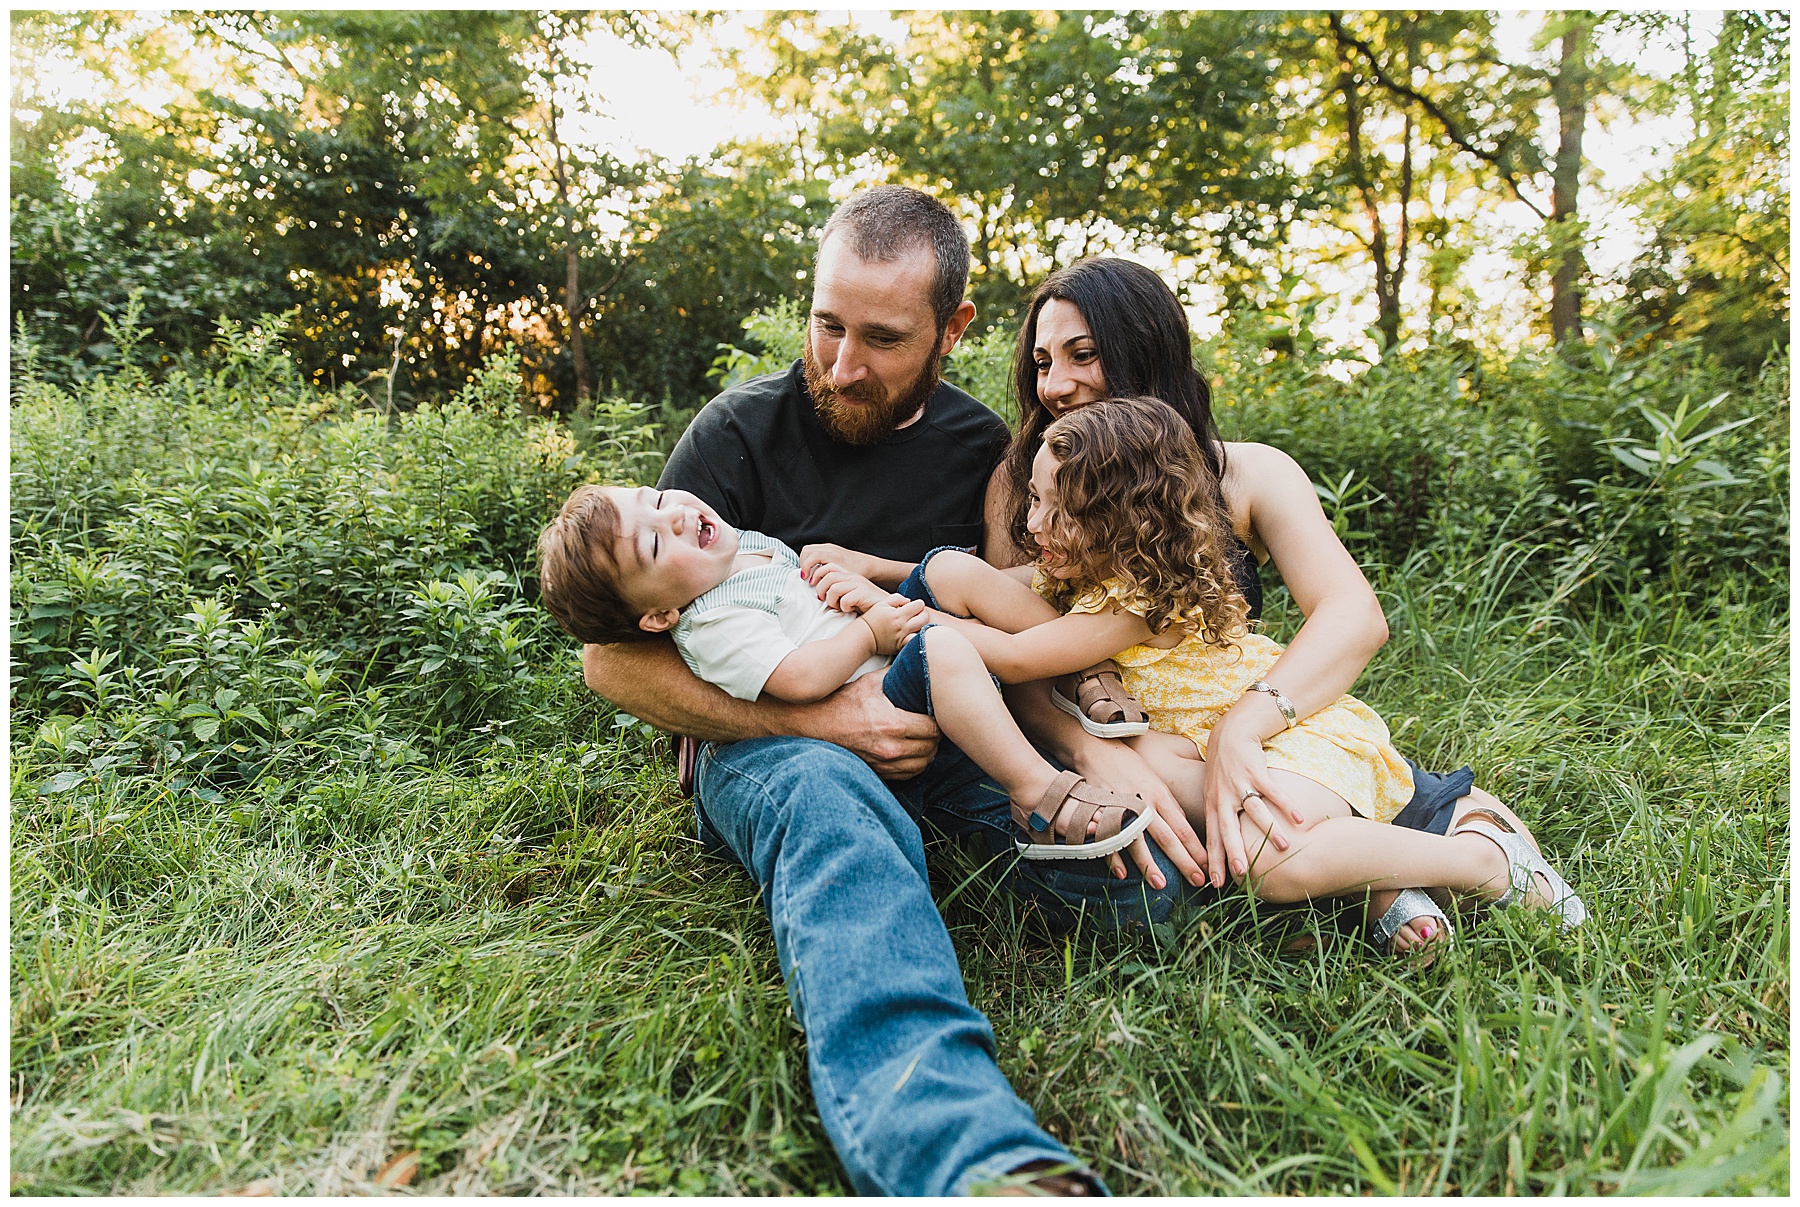 Cooperstown Family Photographer, family spending time together during their photo session